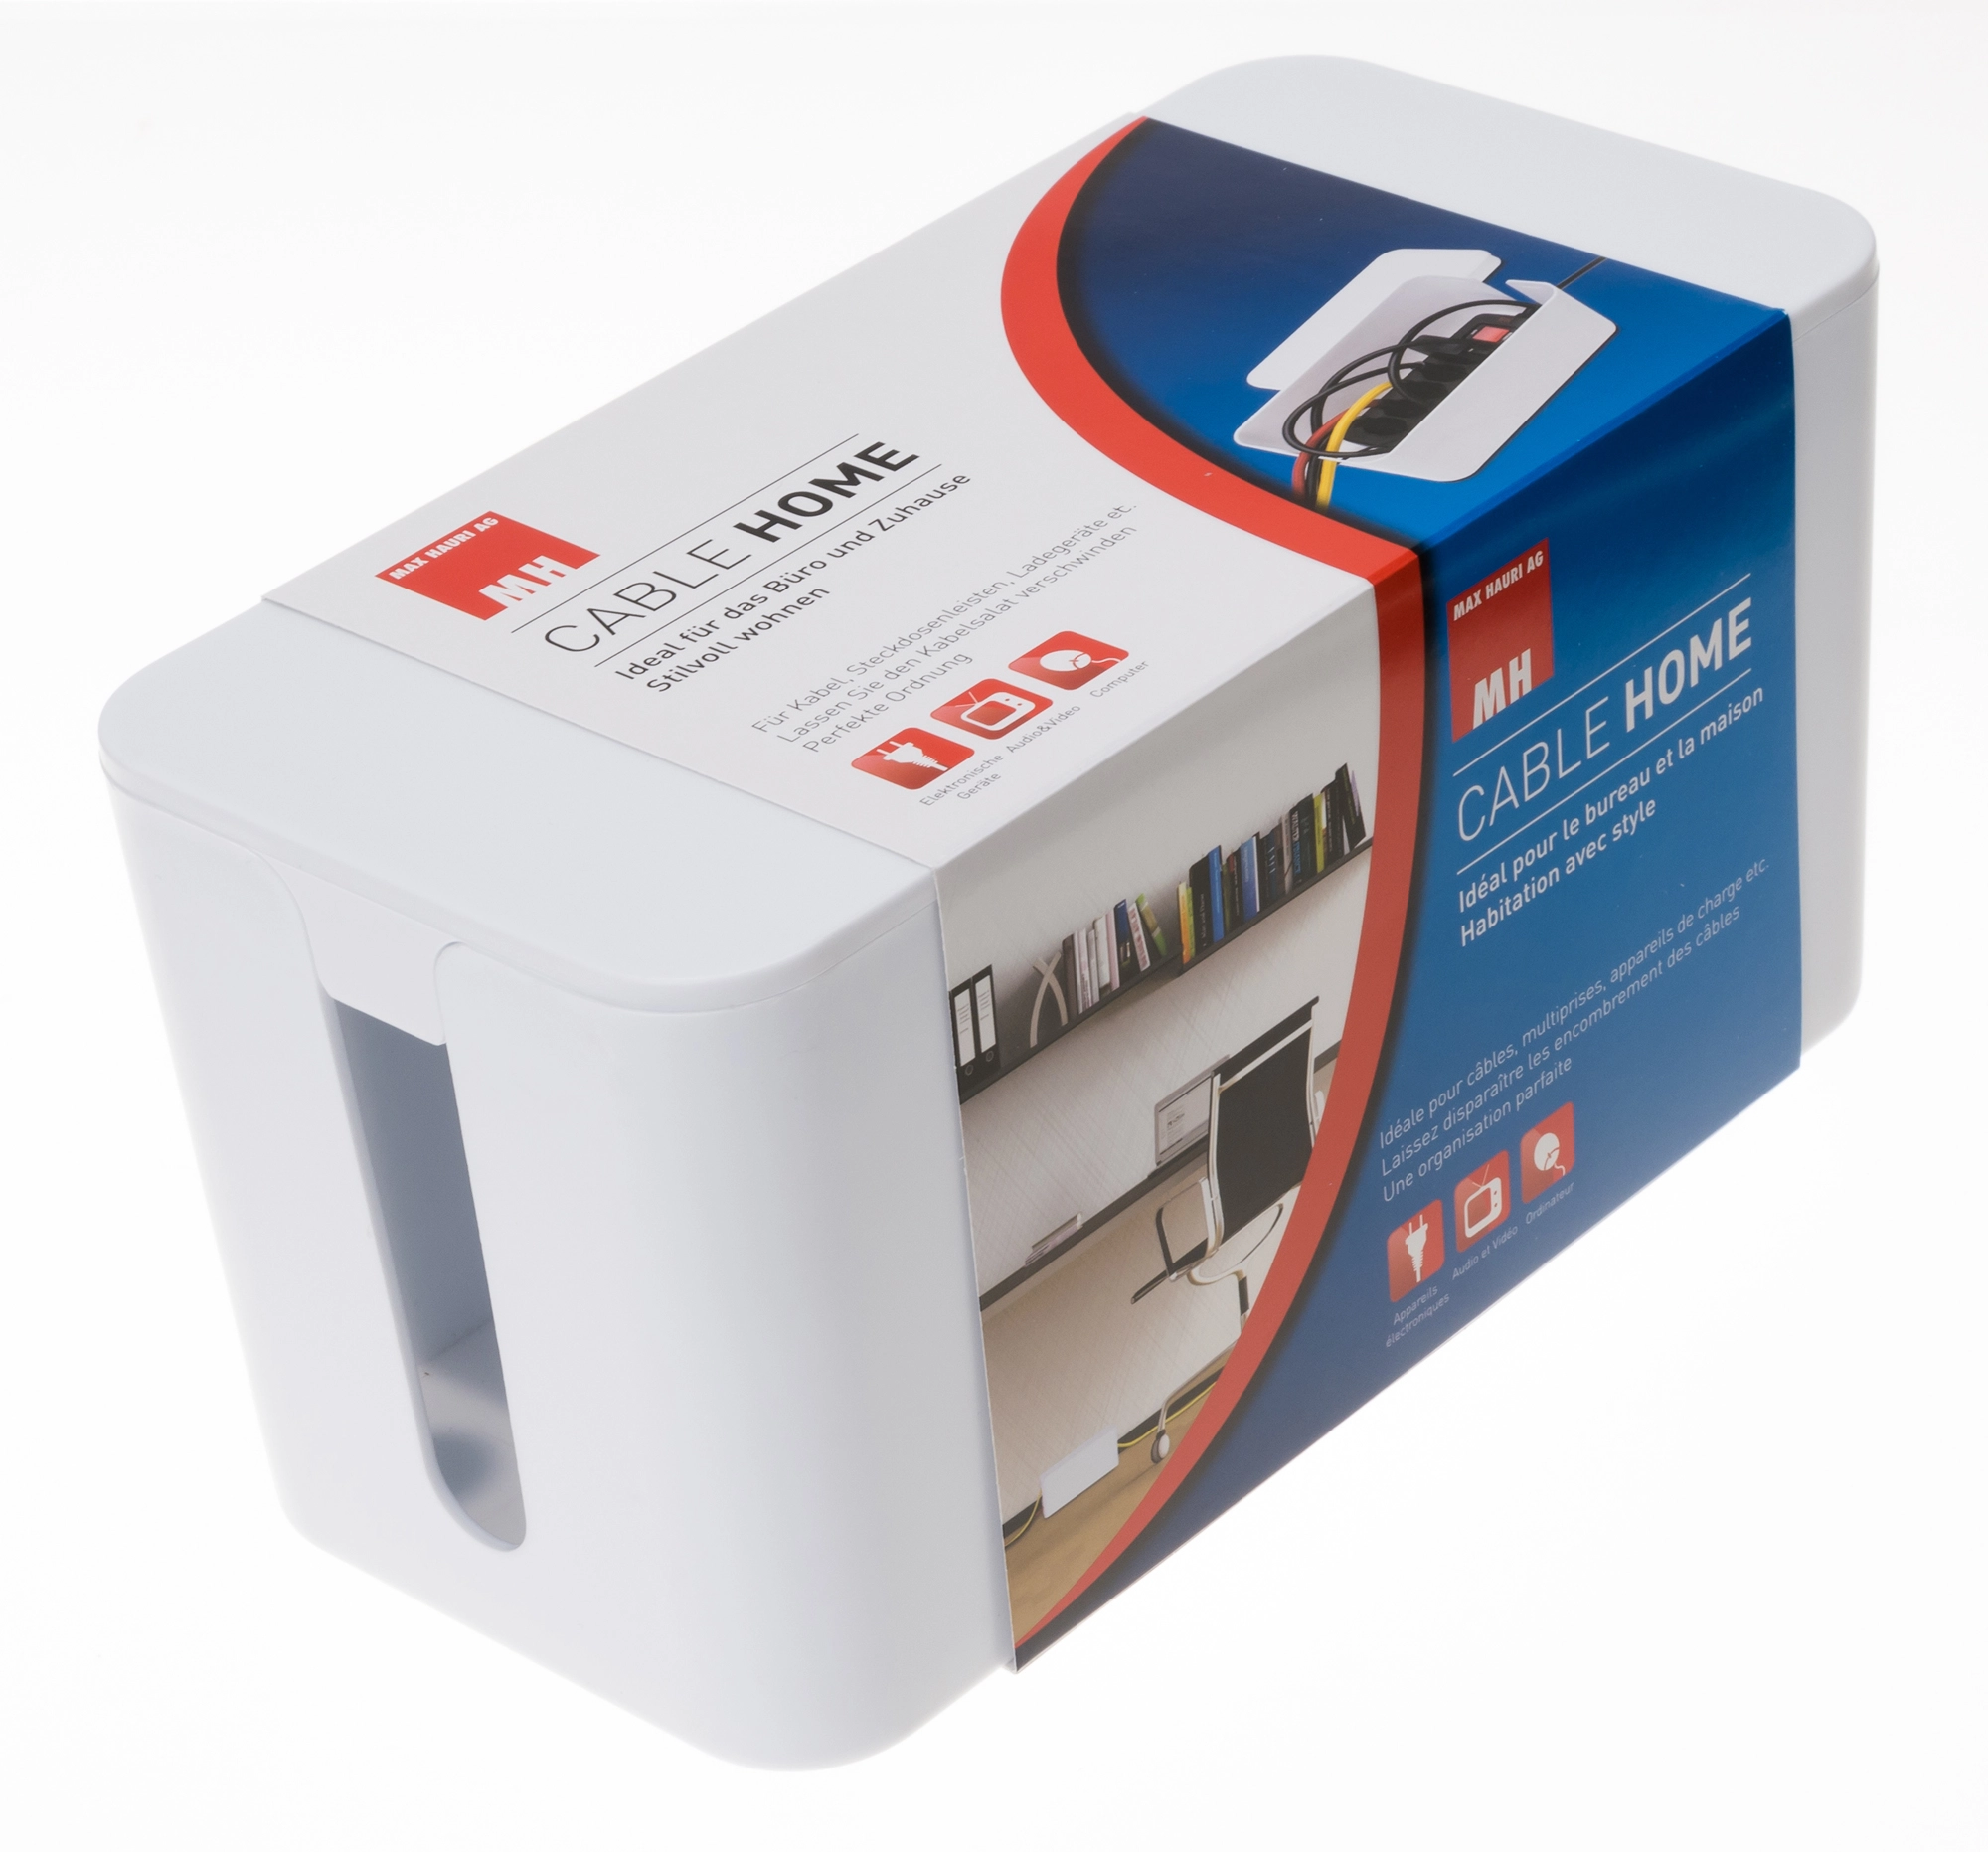 Cable Facility Box Cable Home petit Blanc